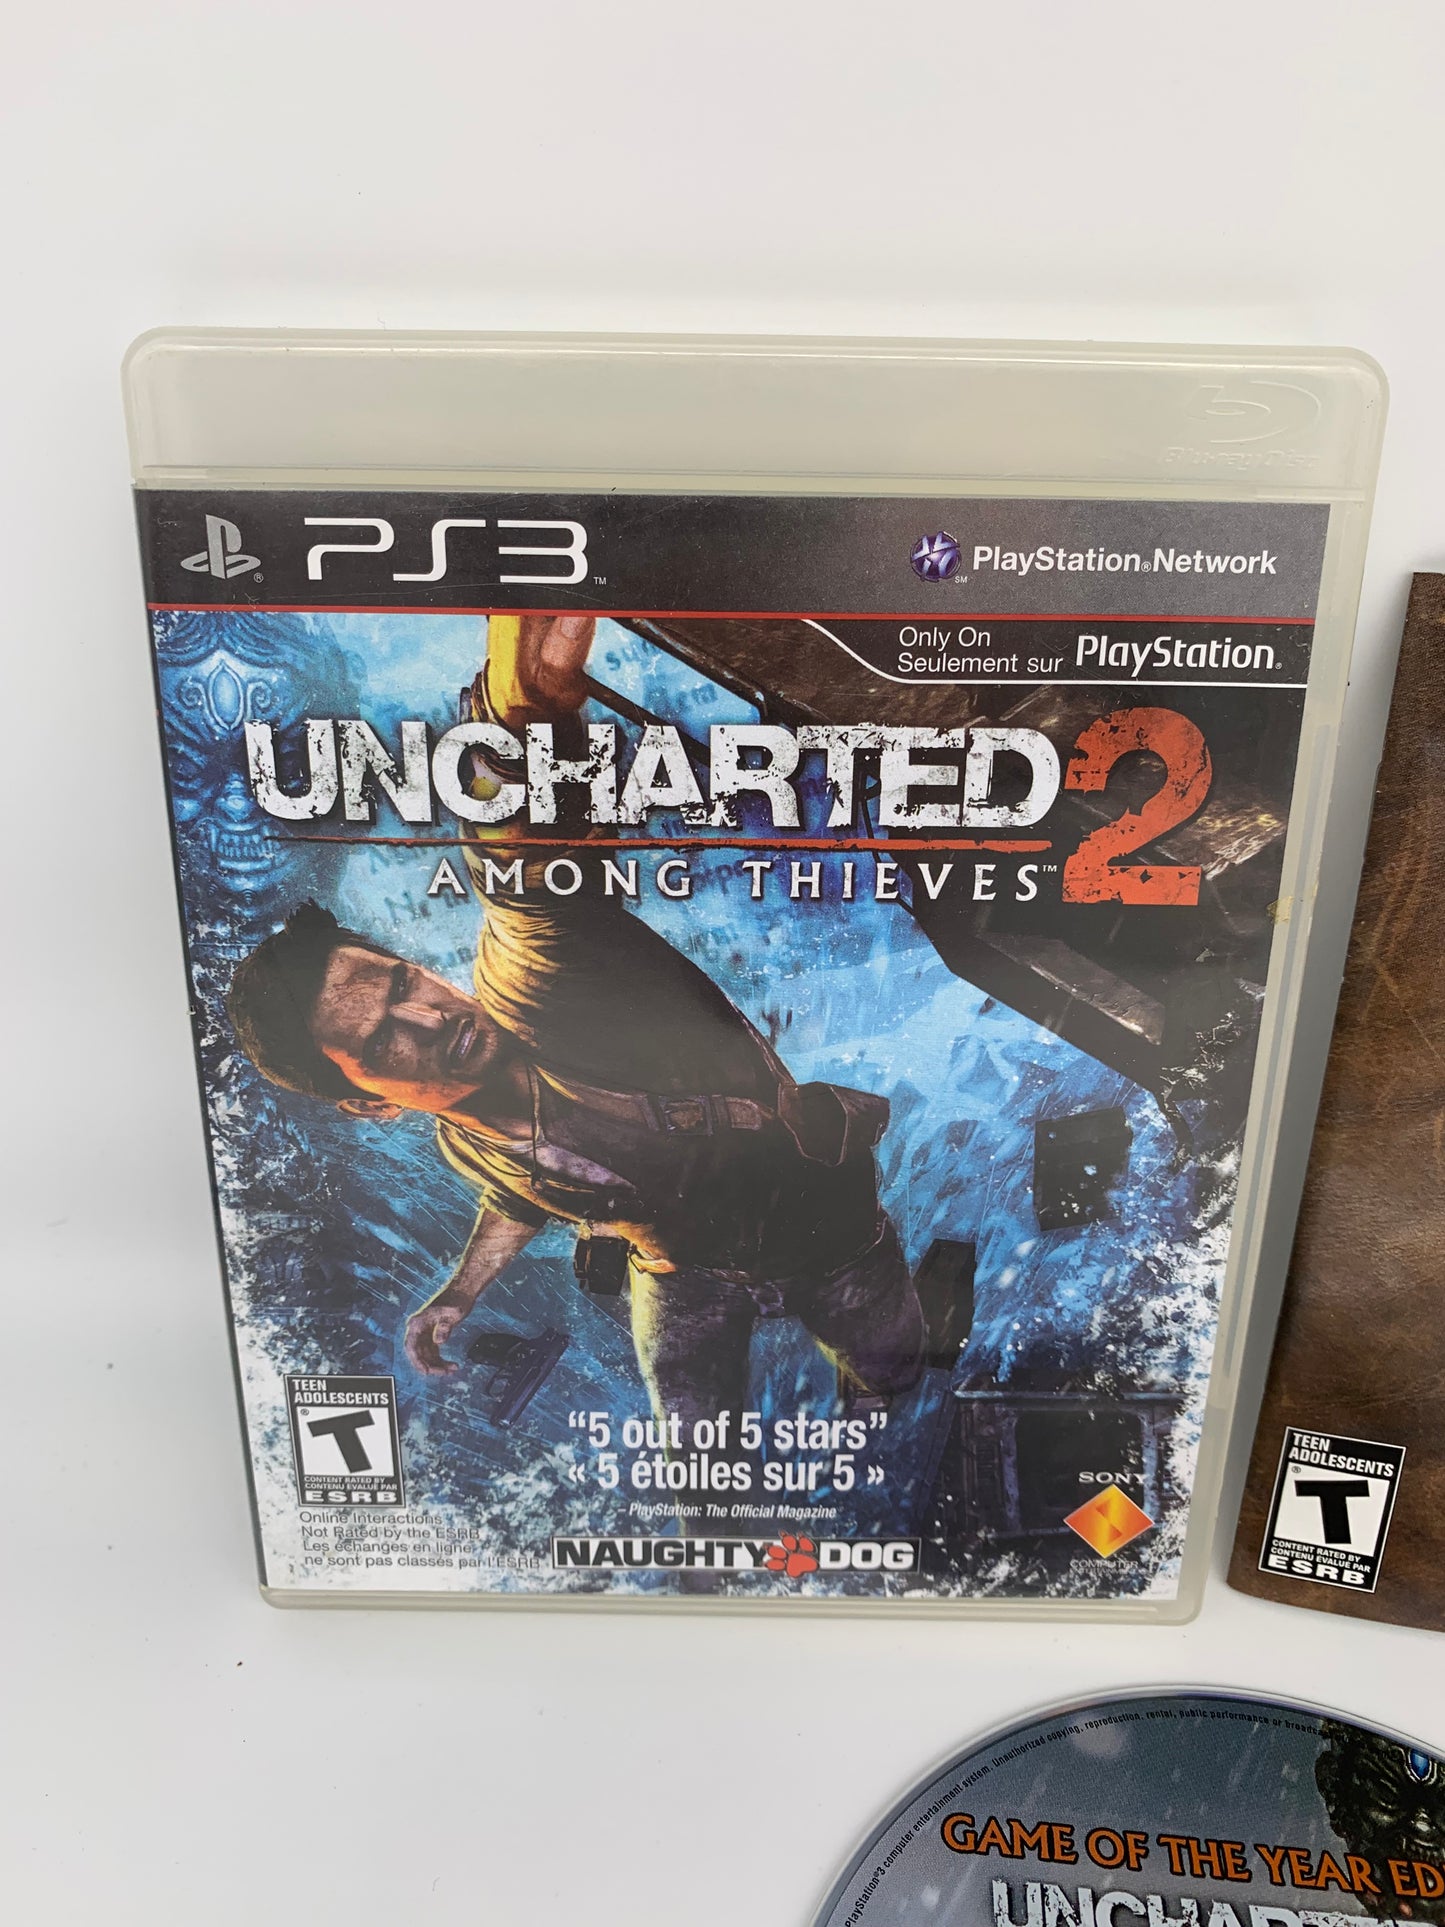 SONY PLAYSTATiON 3 [PS3] | UNCHARTED 2 AMONG THiEVES